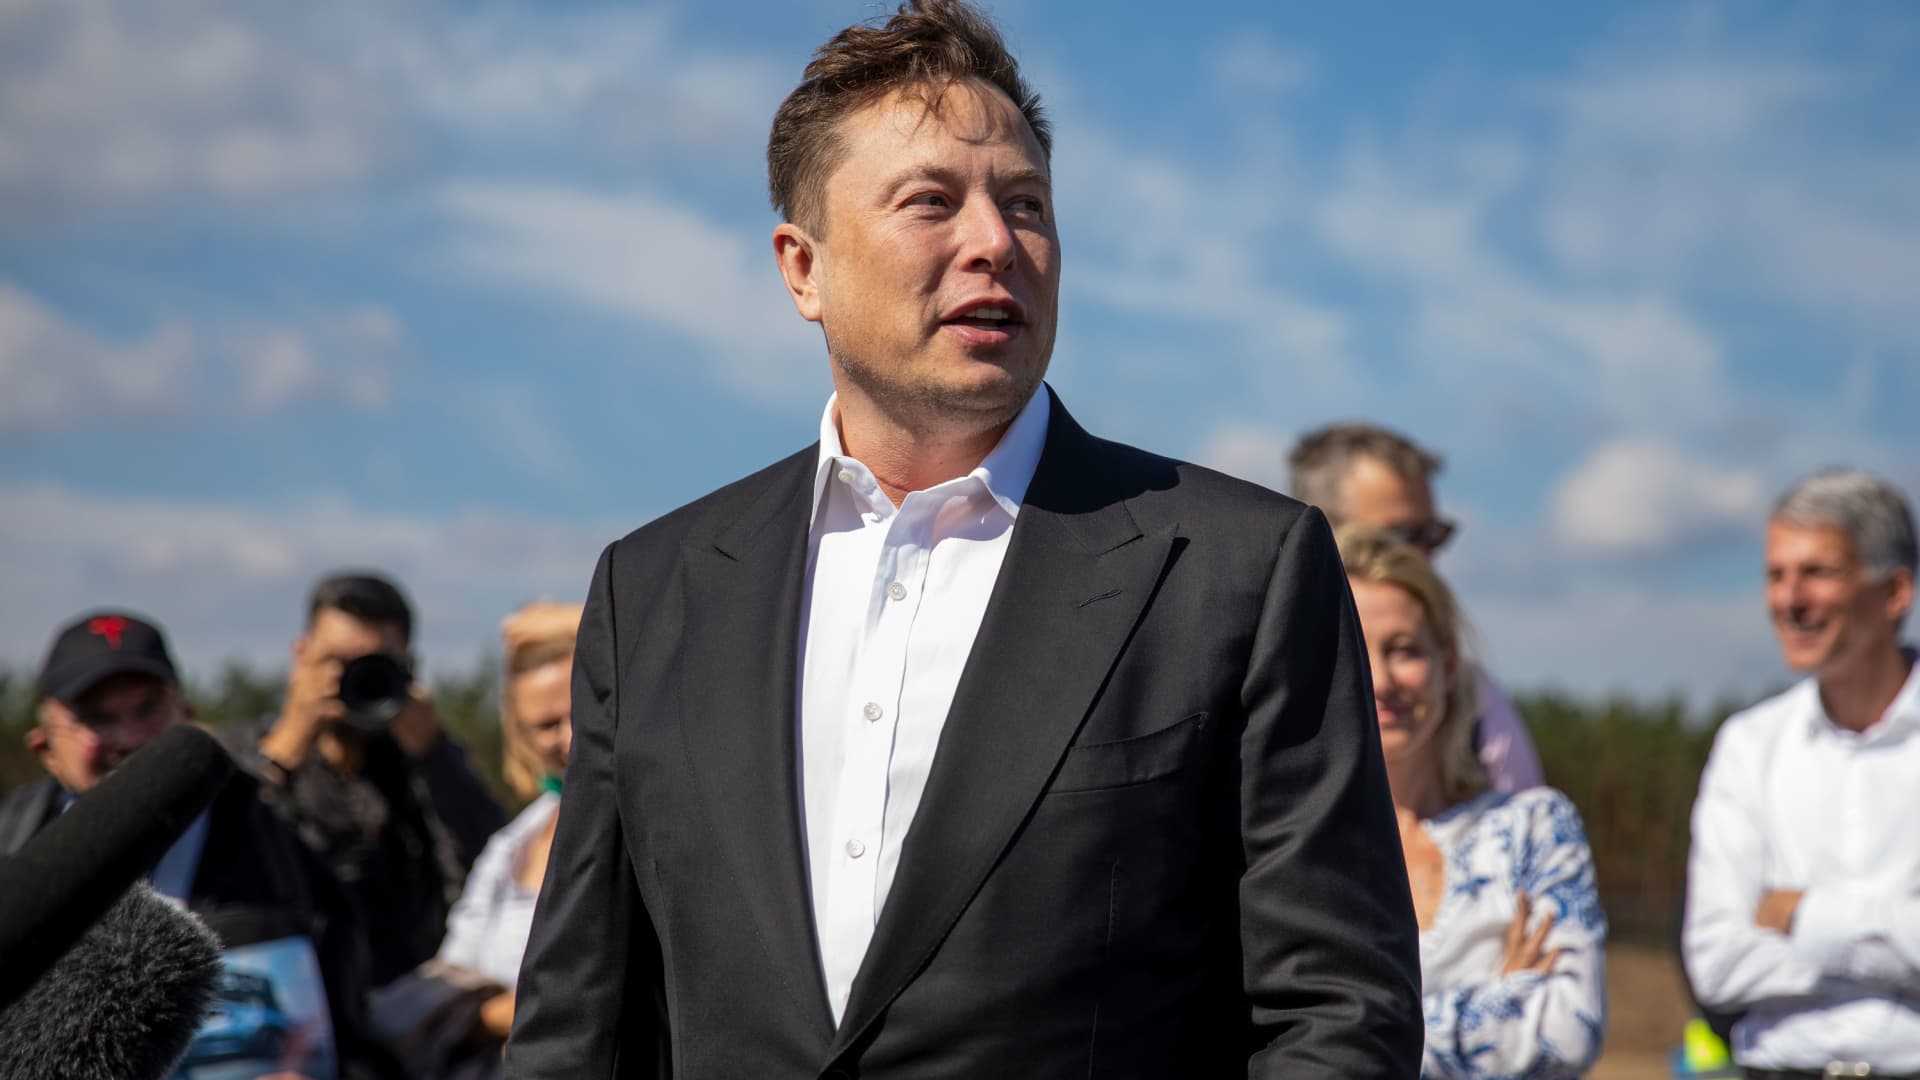 Elon Musk will be the most indebted CEO in America if the Twitter deal goes through